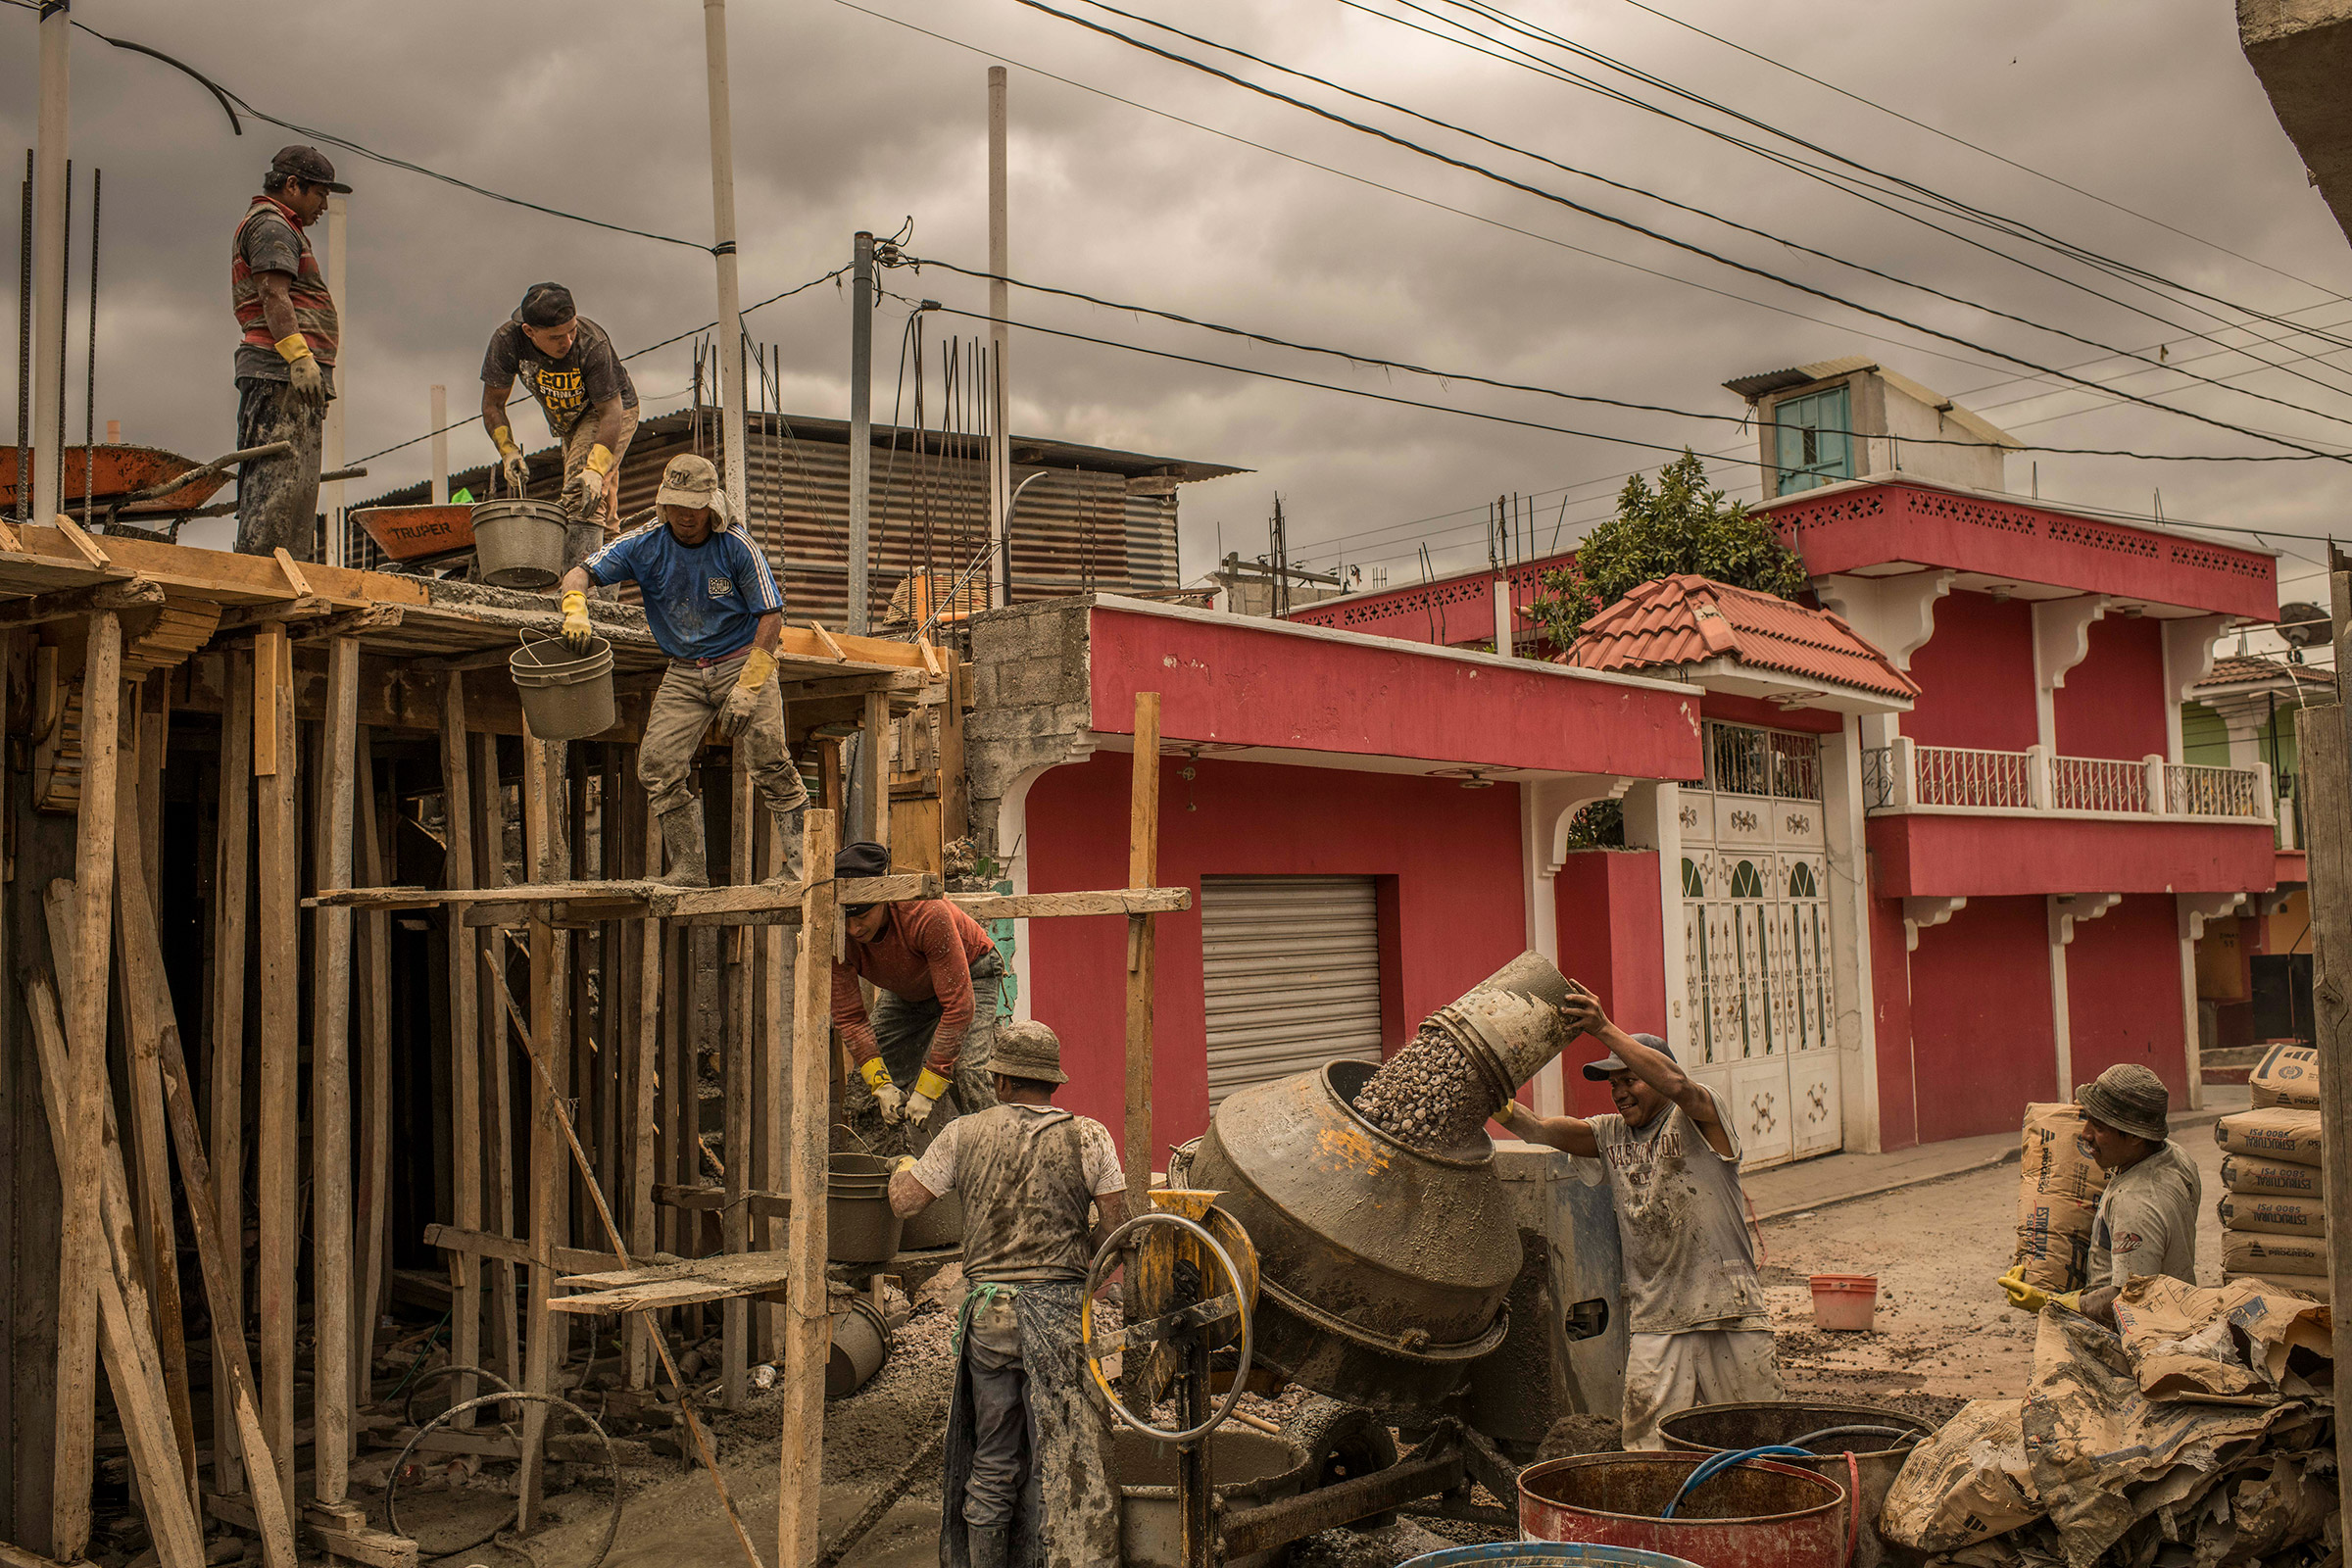 Workers are building the house of Rubi Soberaniz, 23 (not pictured). Her father, Joel Soberaniz, who died in 2019 at 47, migrated in the US twice, in '93, staying 4 years in Los Angeles, California, and in 2004, when spent 2 years in Atlanta. Joel supported economicly his family, built their house and payed for Rubi's studies. Now Rubi decided build her house beside her family's house.Guatemala is undergoing a rapid period of urbanization, projected to take the country from around 54% of the population living in cities now—the lowest proportion in Latin America—to around 65% in 2030, according to U.N. estimates.Cajolá, Quetzaltenango, Guatemala. April 8, 2022.All around this southwestern highland region of Guatemala, which is the starting point for many of the more than 1,000 Guatemalans who leave the country every day for the U.S., elaborate houses are popping up. Three storey homes with neoclassical facades and Ffrench windows tower over their cinder- block neighbors. Dubbed “remittance architecture,” the structures are built with money sent home by migrants and look as if they’ve been plucked from American suburbs.Many of these homes aren’t worth the materials they contain, according to development experts. A lack of access to information, support from banks, or oversight from government often leads recipients of remittances—the funds sent back home by people who emigrate—to sink their money into property that simply eats up cash. The houses that migration built often sit on uneven ground in areas with risks of landslides, or in places disconnected from sewers and roads. Often, the homes sit empty, as migrants opt to stay in the U.S. and their families prefer the comfort of their neighborhoods.